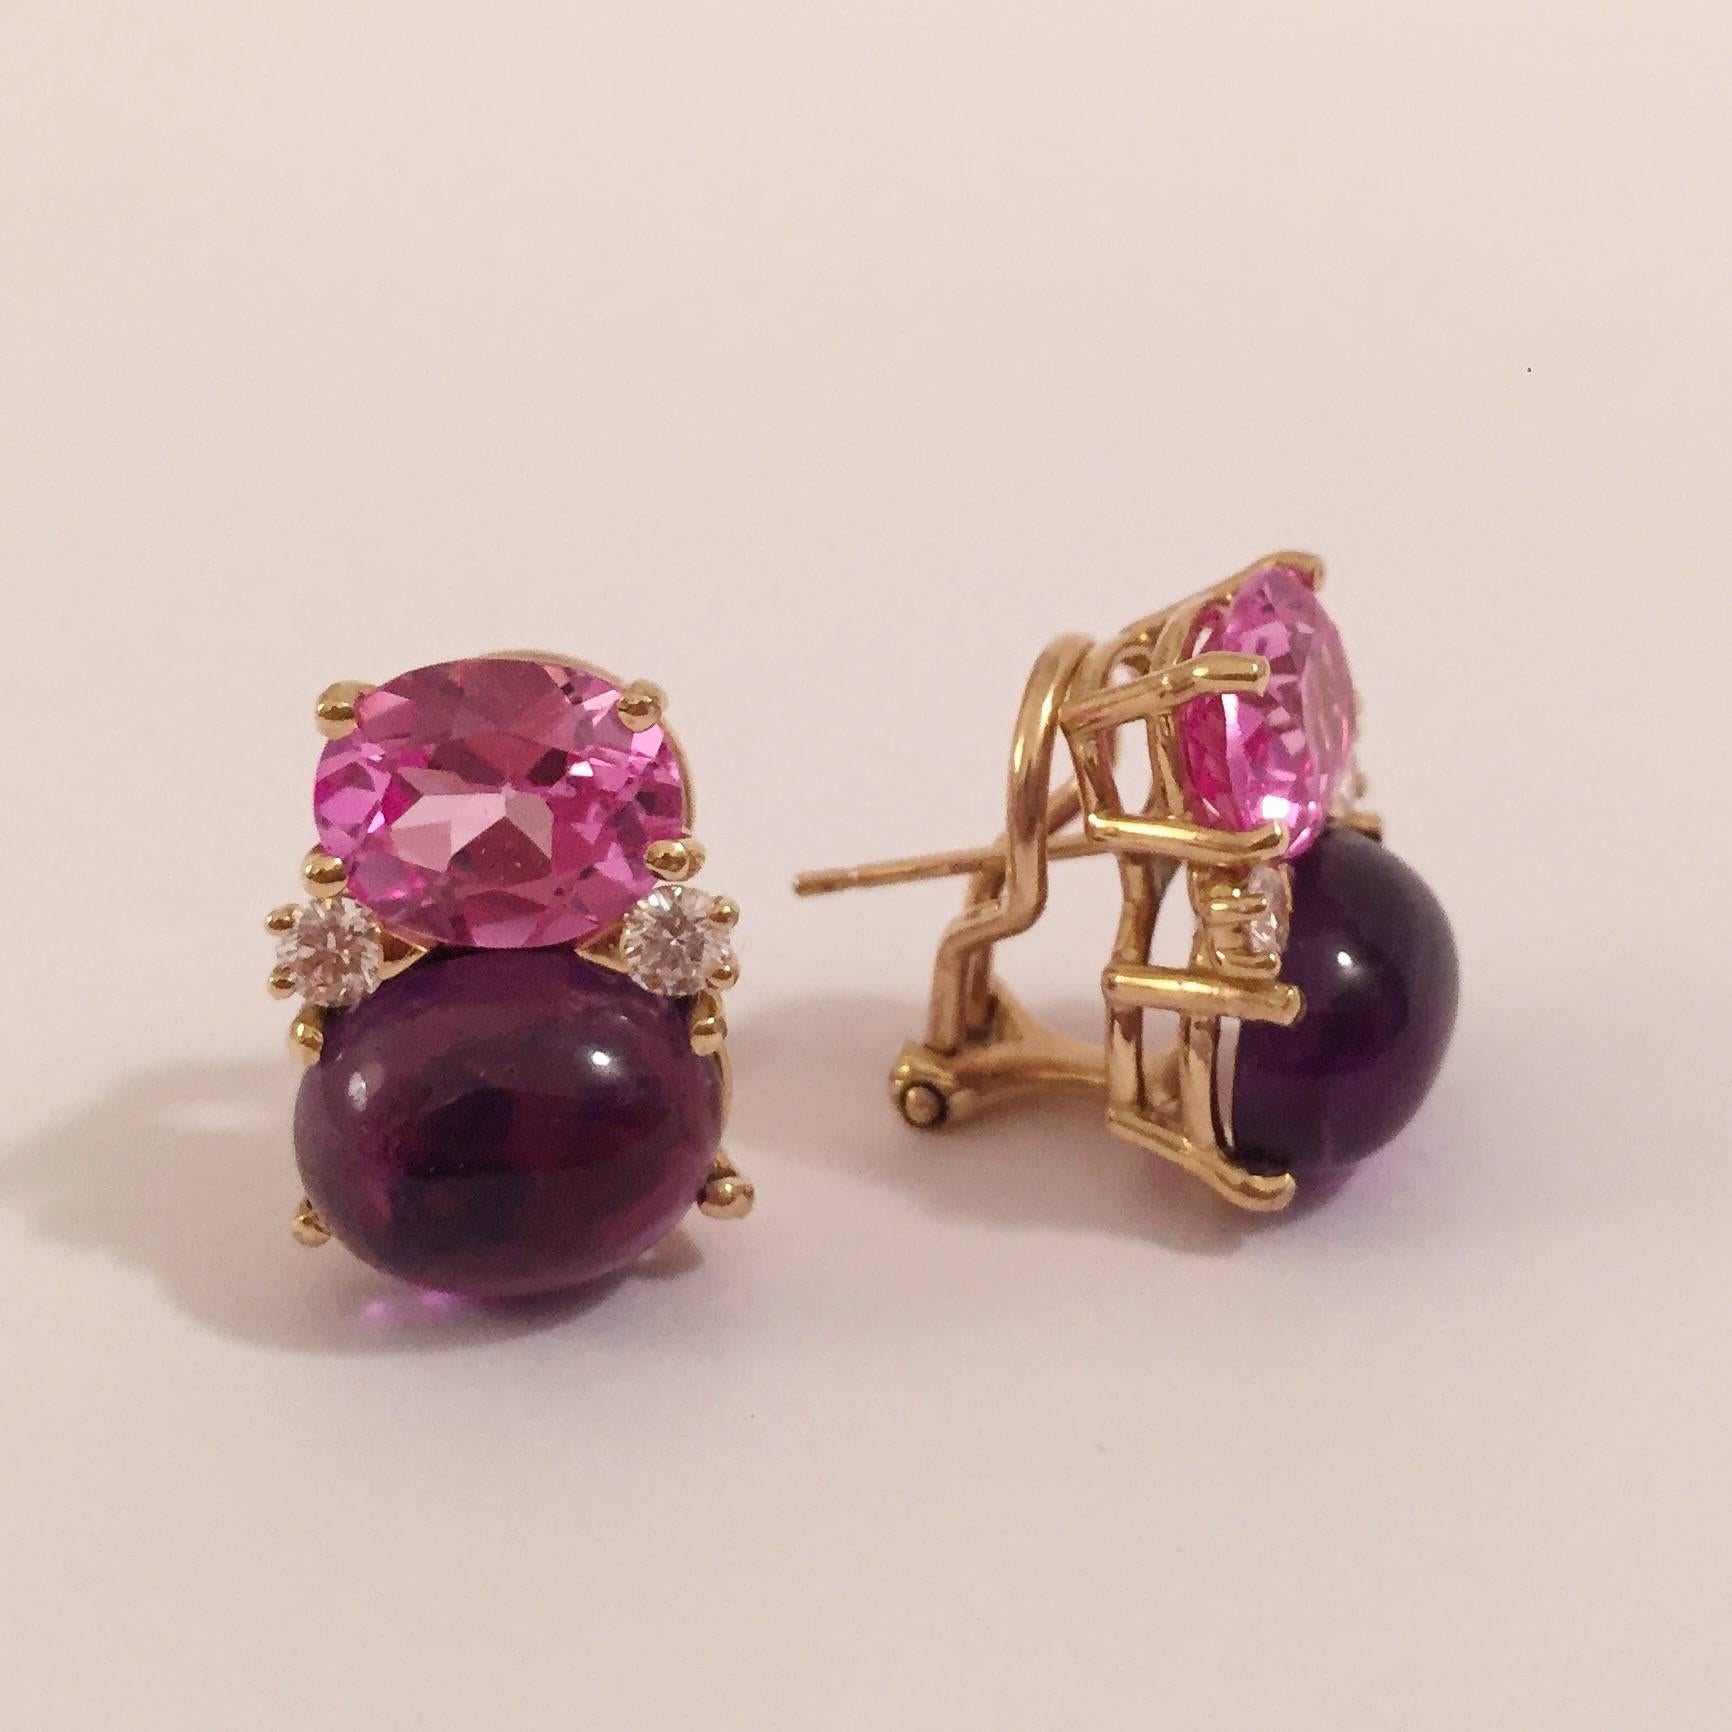 Medium 18kt yellow gold GUM DROP™ earrings with faceted Pink Topaz (approximately 2.5 cts each), cabochon Amethyst (approximately 5 cts each), and 4 diamonds weighing ~0.40 cts.   

Specifications: Height: 3/4